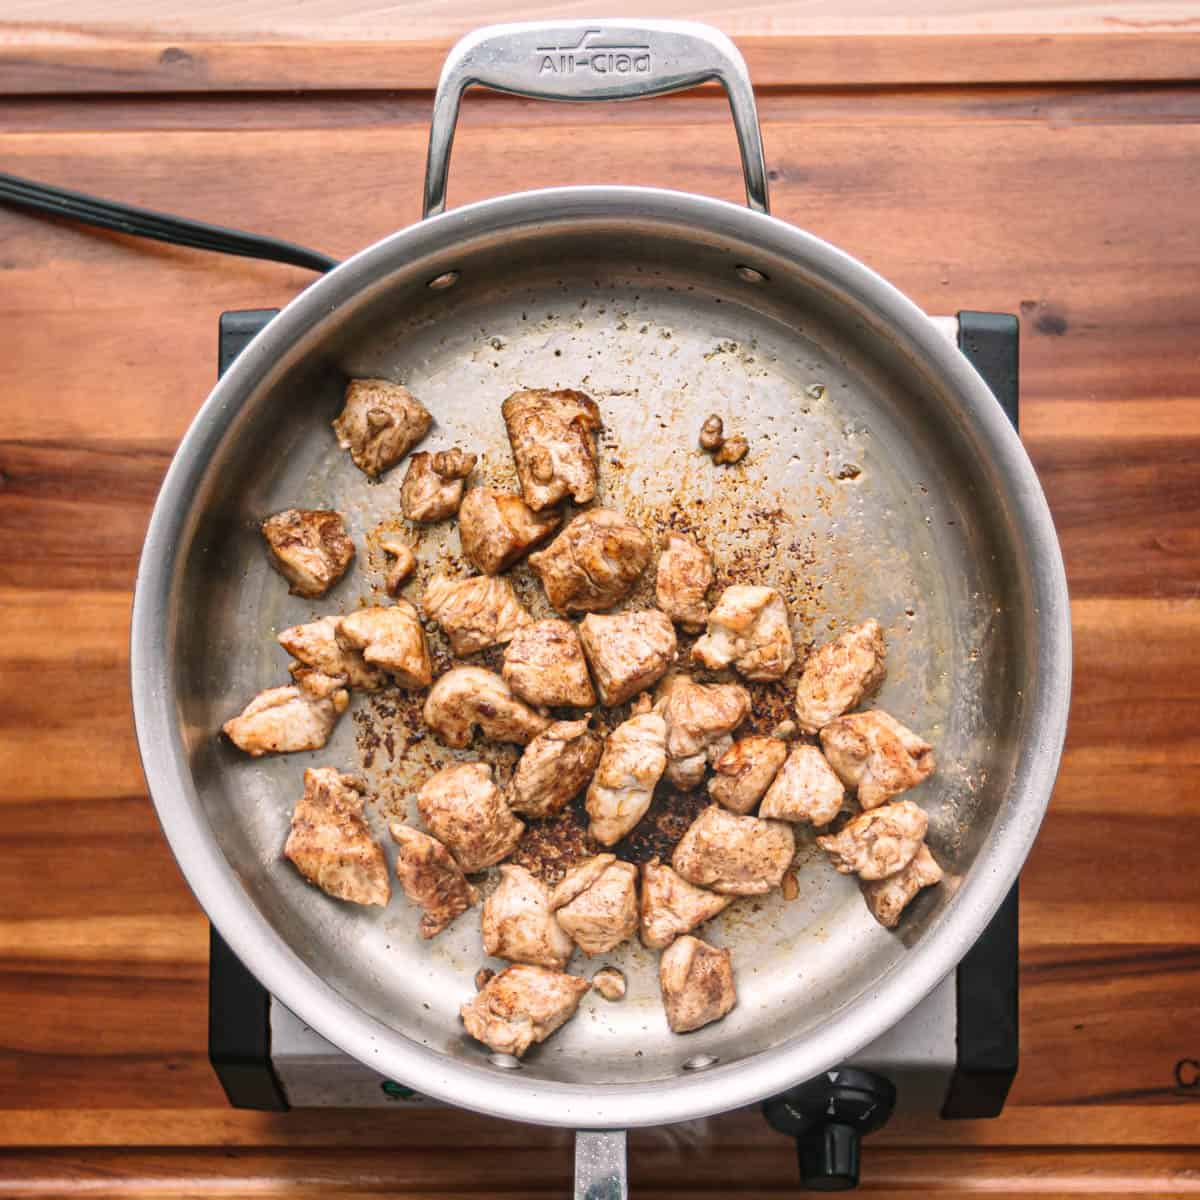 Place the chicken cubes in the skillet and brown them until they are almost cooked.